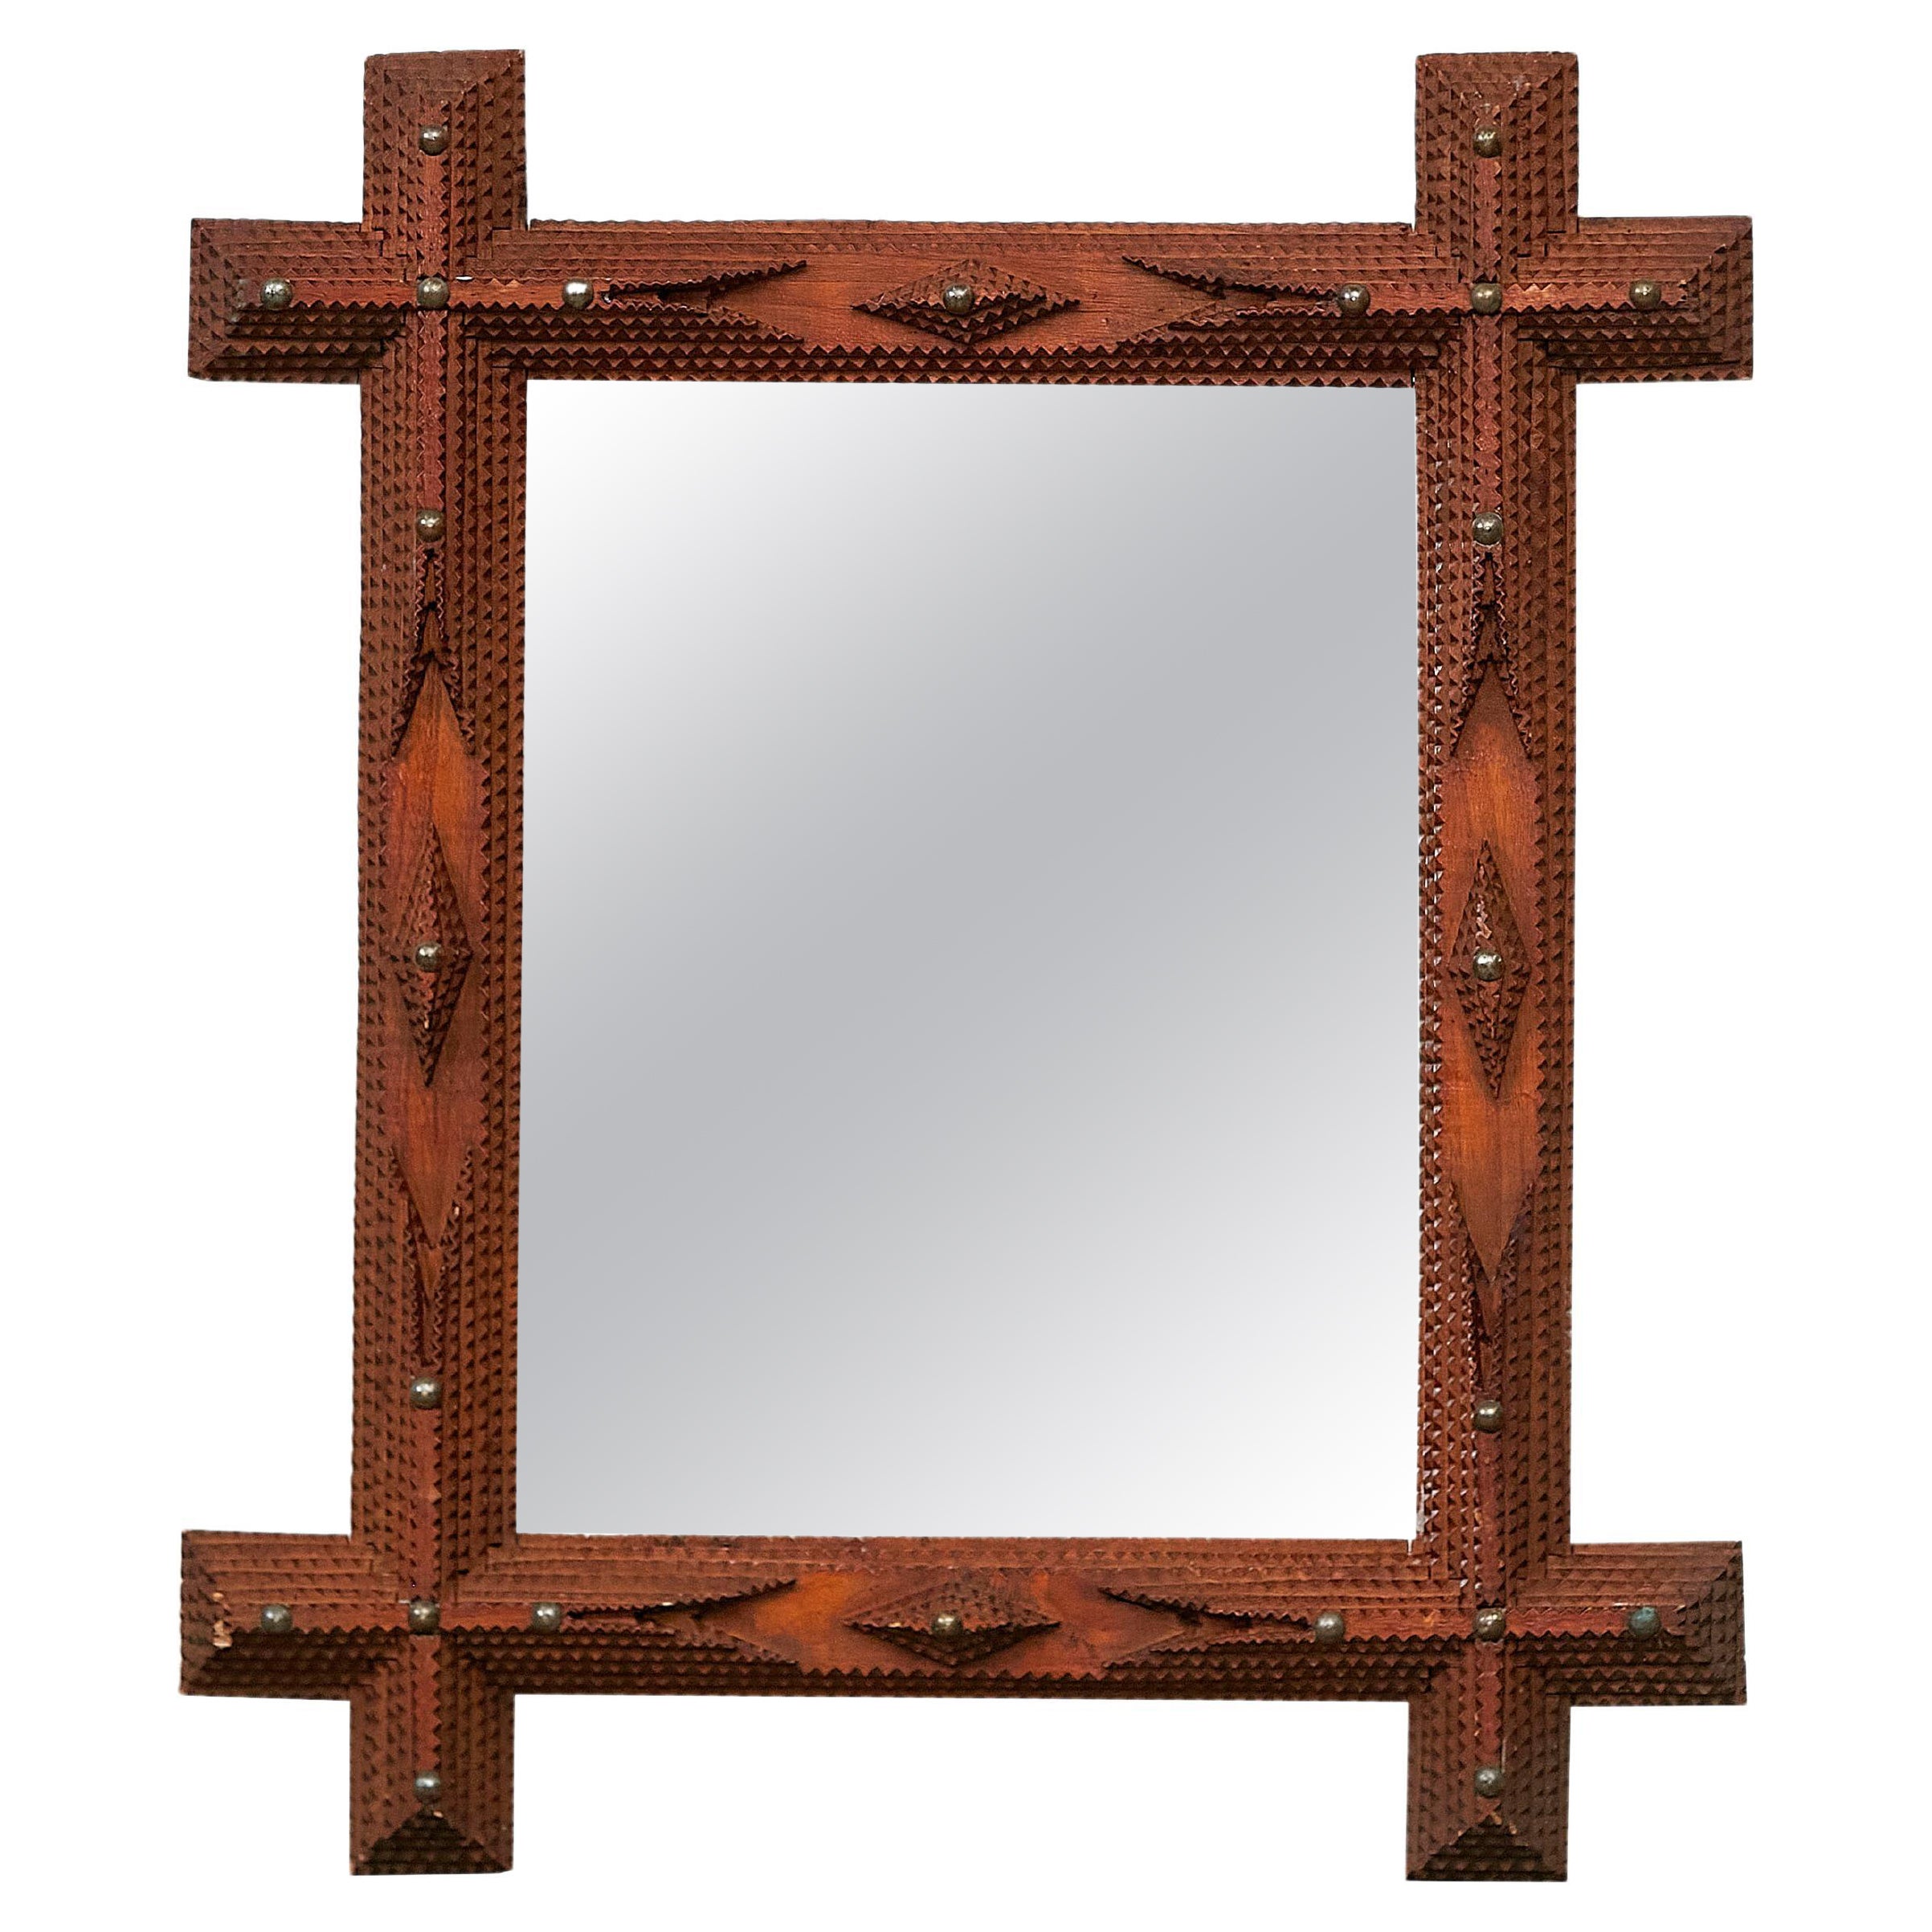 French 1900s Tramp Art Mirror with Brass Nailheads and Protruding Corners For Sale